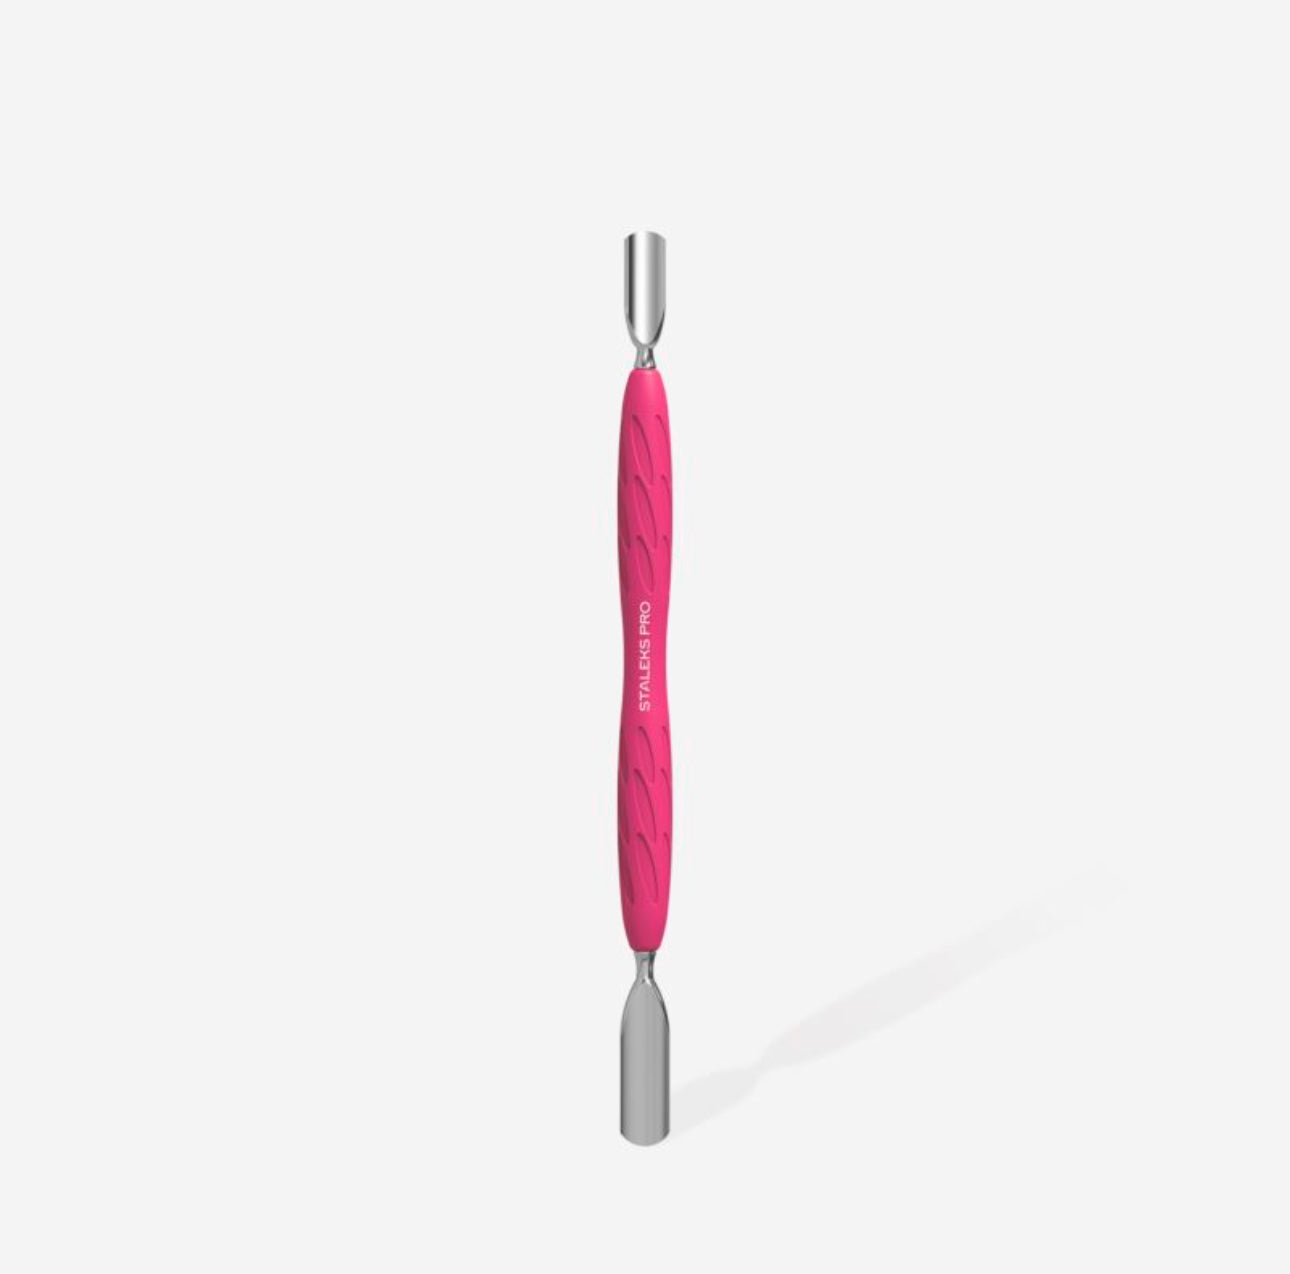 Manicure pusher with silicone handle “Gummy” UNIQ 10 TYPE 1 (wide rounded pusher + narrow rounded pusher)